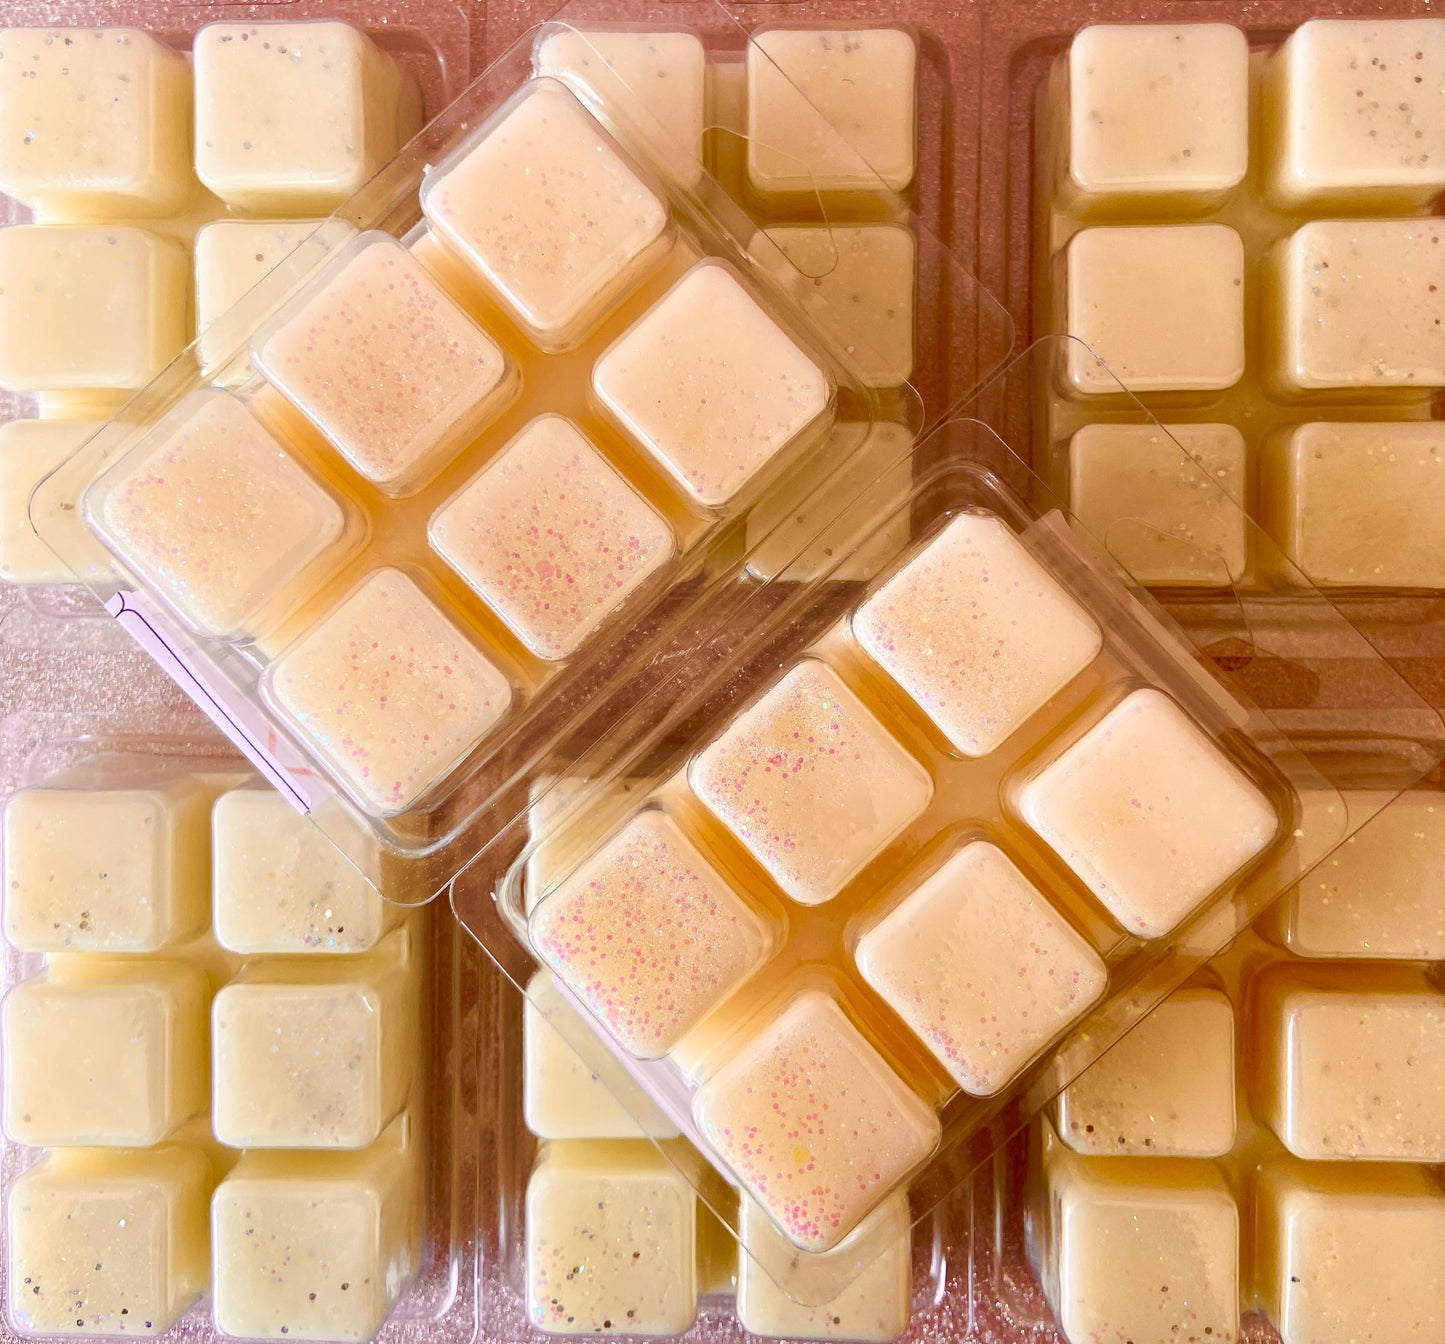 Several plastic clamshell containers each hold nine creamy white Toffee Apple Wax Melt by The Soap Gal x with scattered colored specks, arranged in a flat layout. Infused with the warm, inviting bonfire scent, these soy wax melts evoke cozy evenings by the fire.